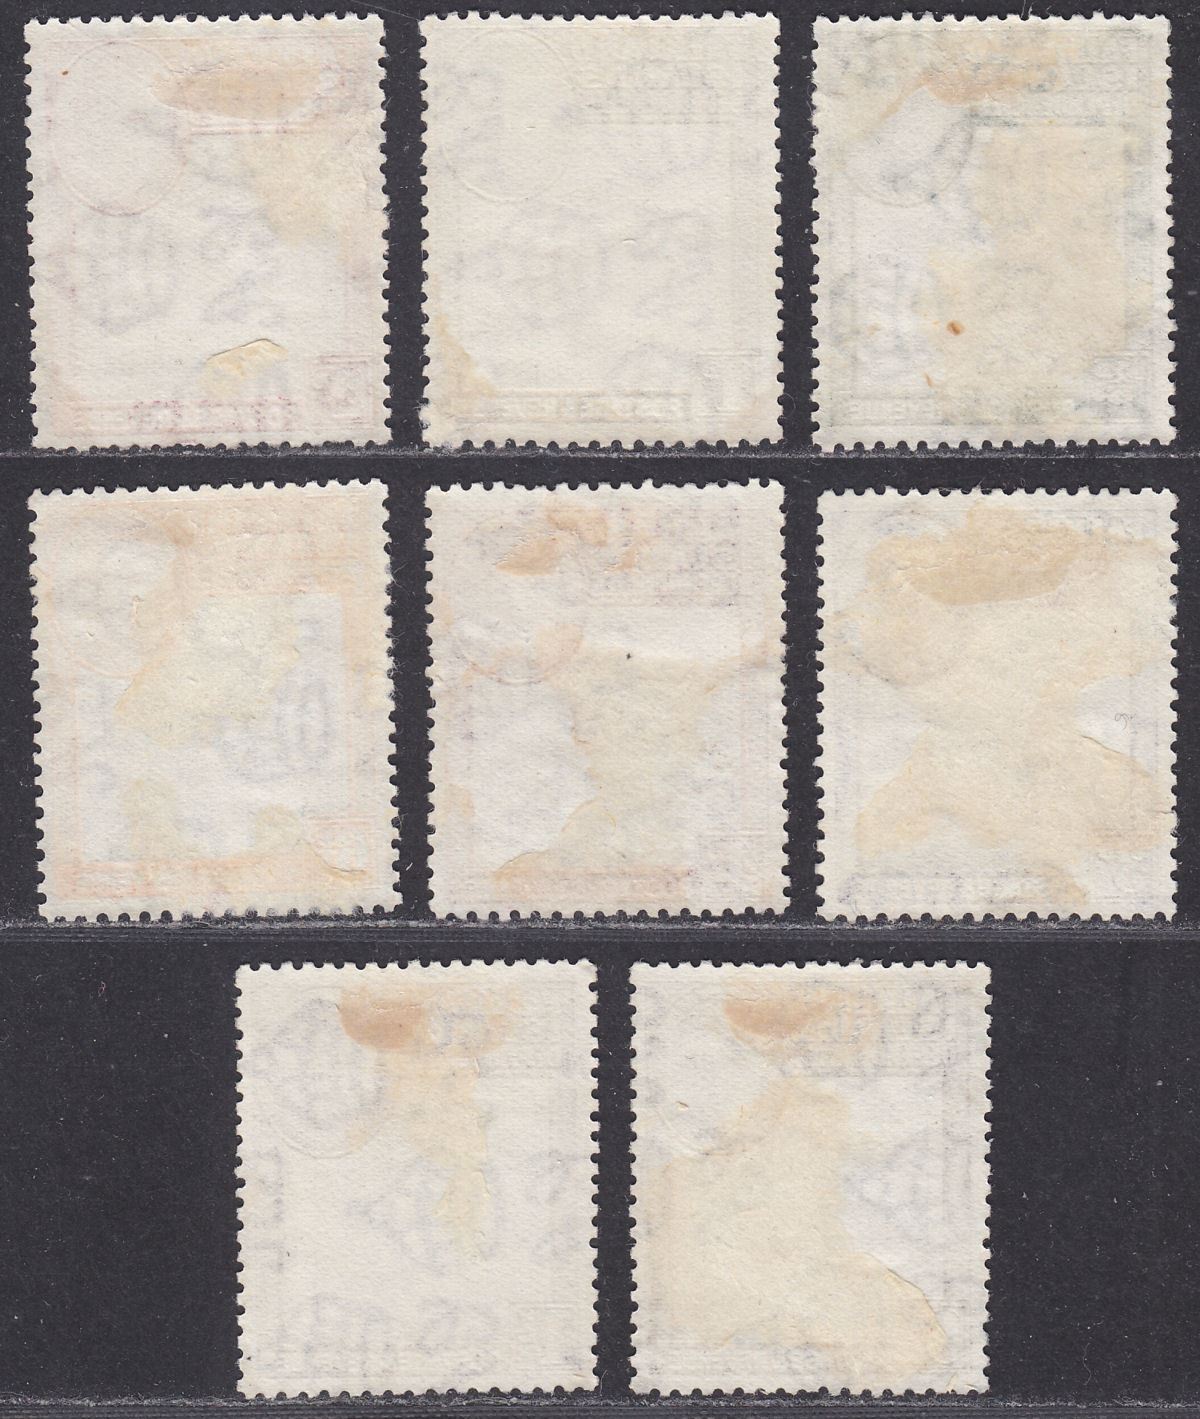 Falkland Islands Dependencies 1946 KGVI Thick Map Set Used SG G1-G8 cat £27